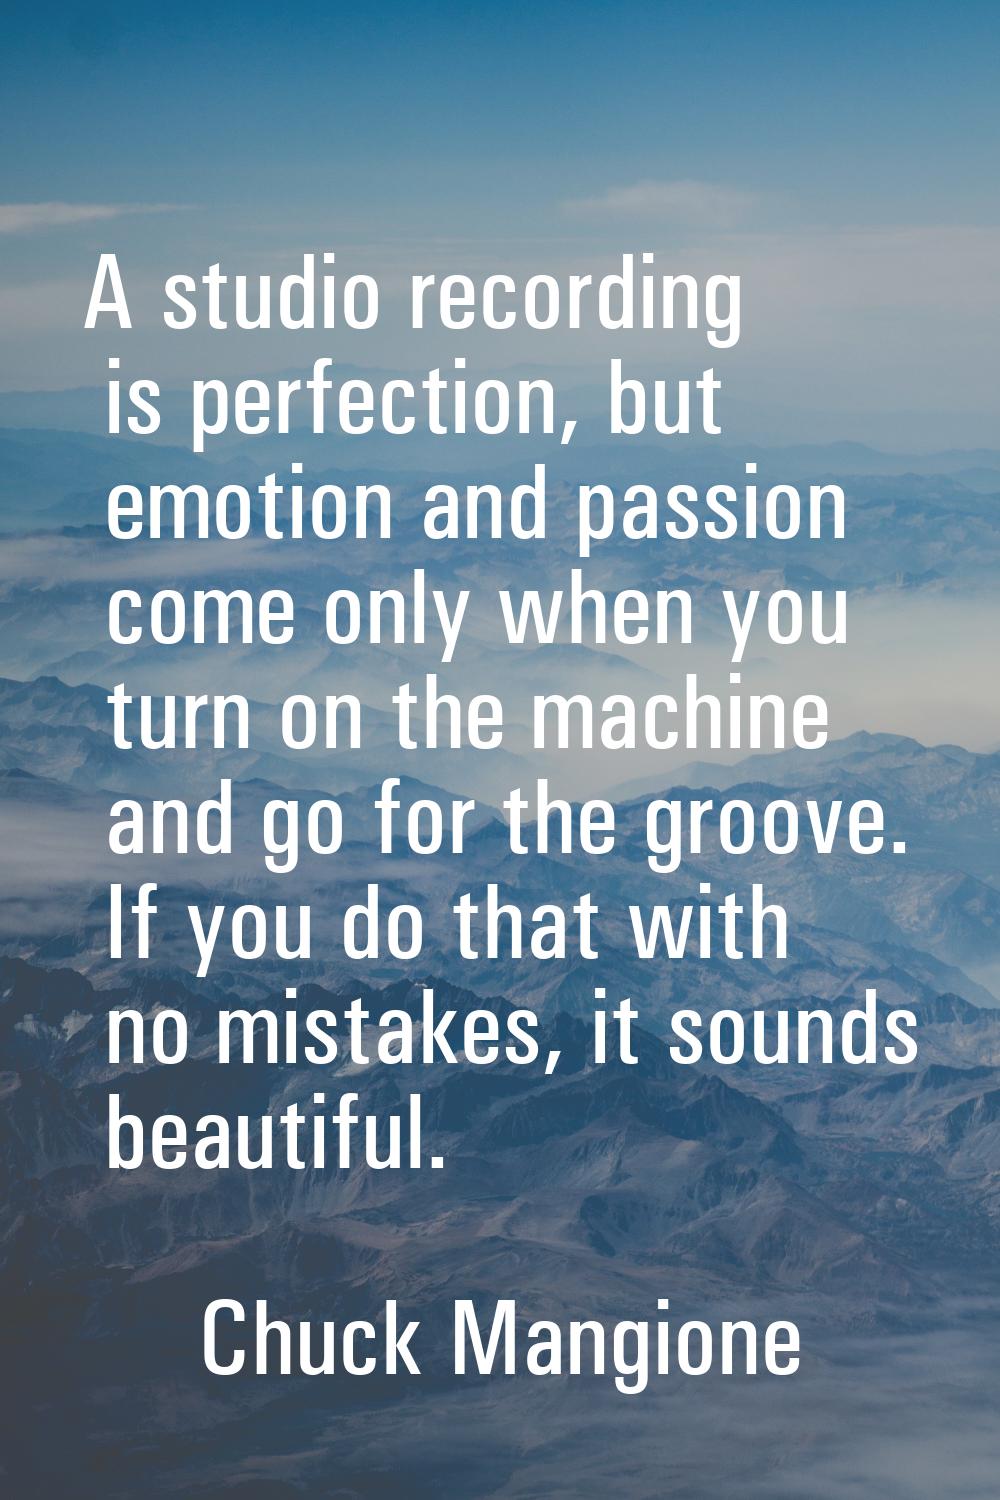 A studio recording is perfection, but emotion and passion come only when you turn on the machine an